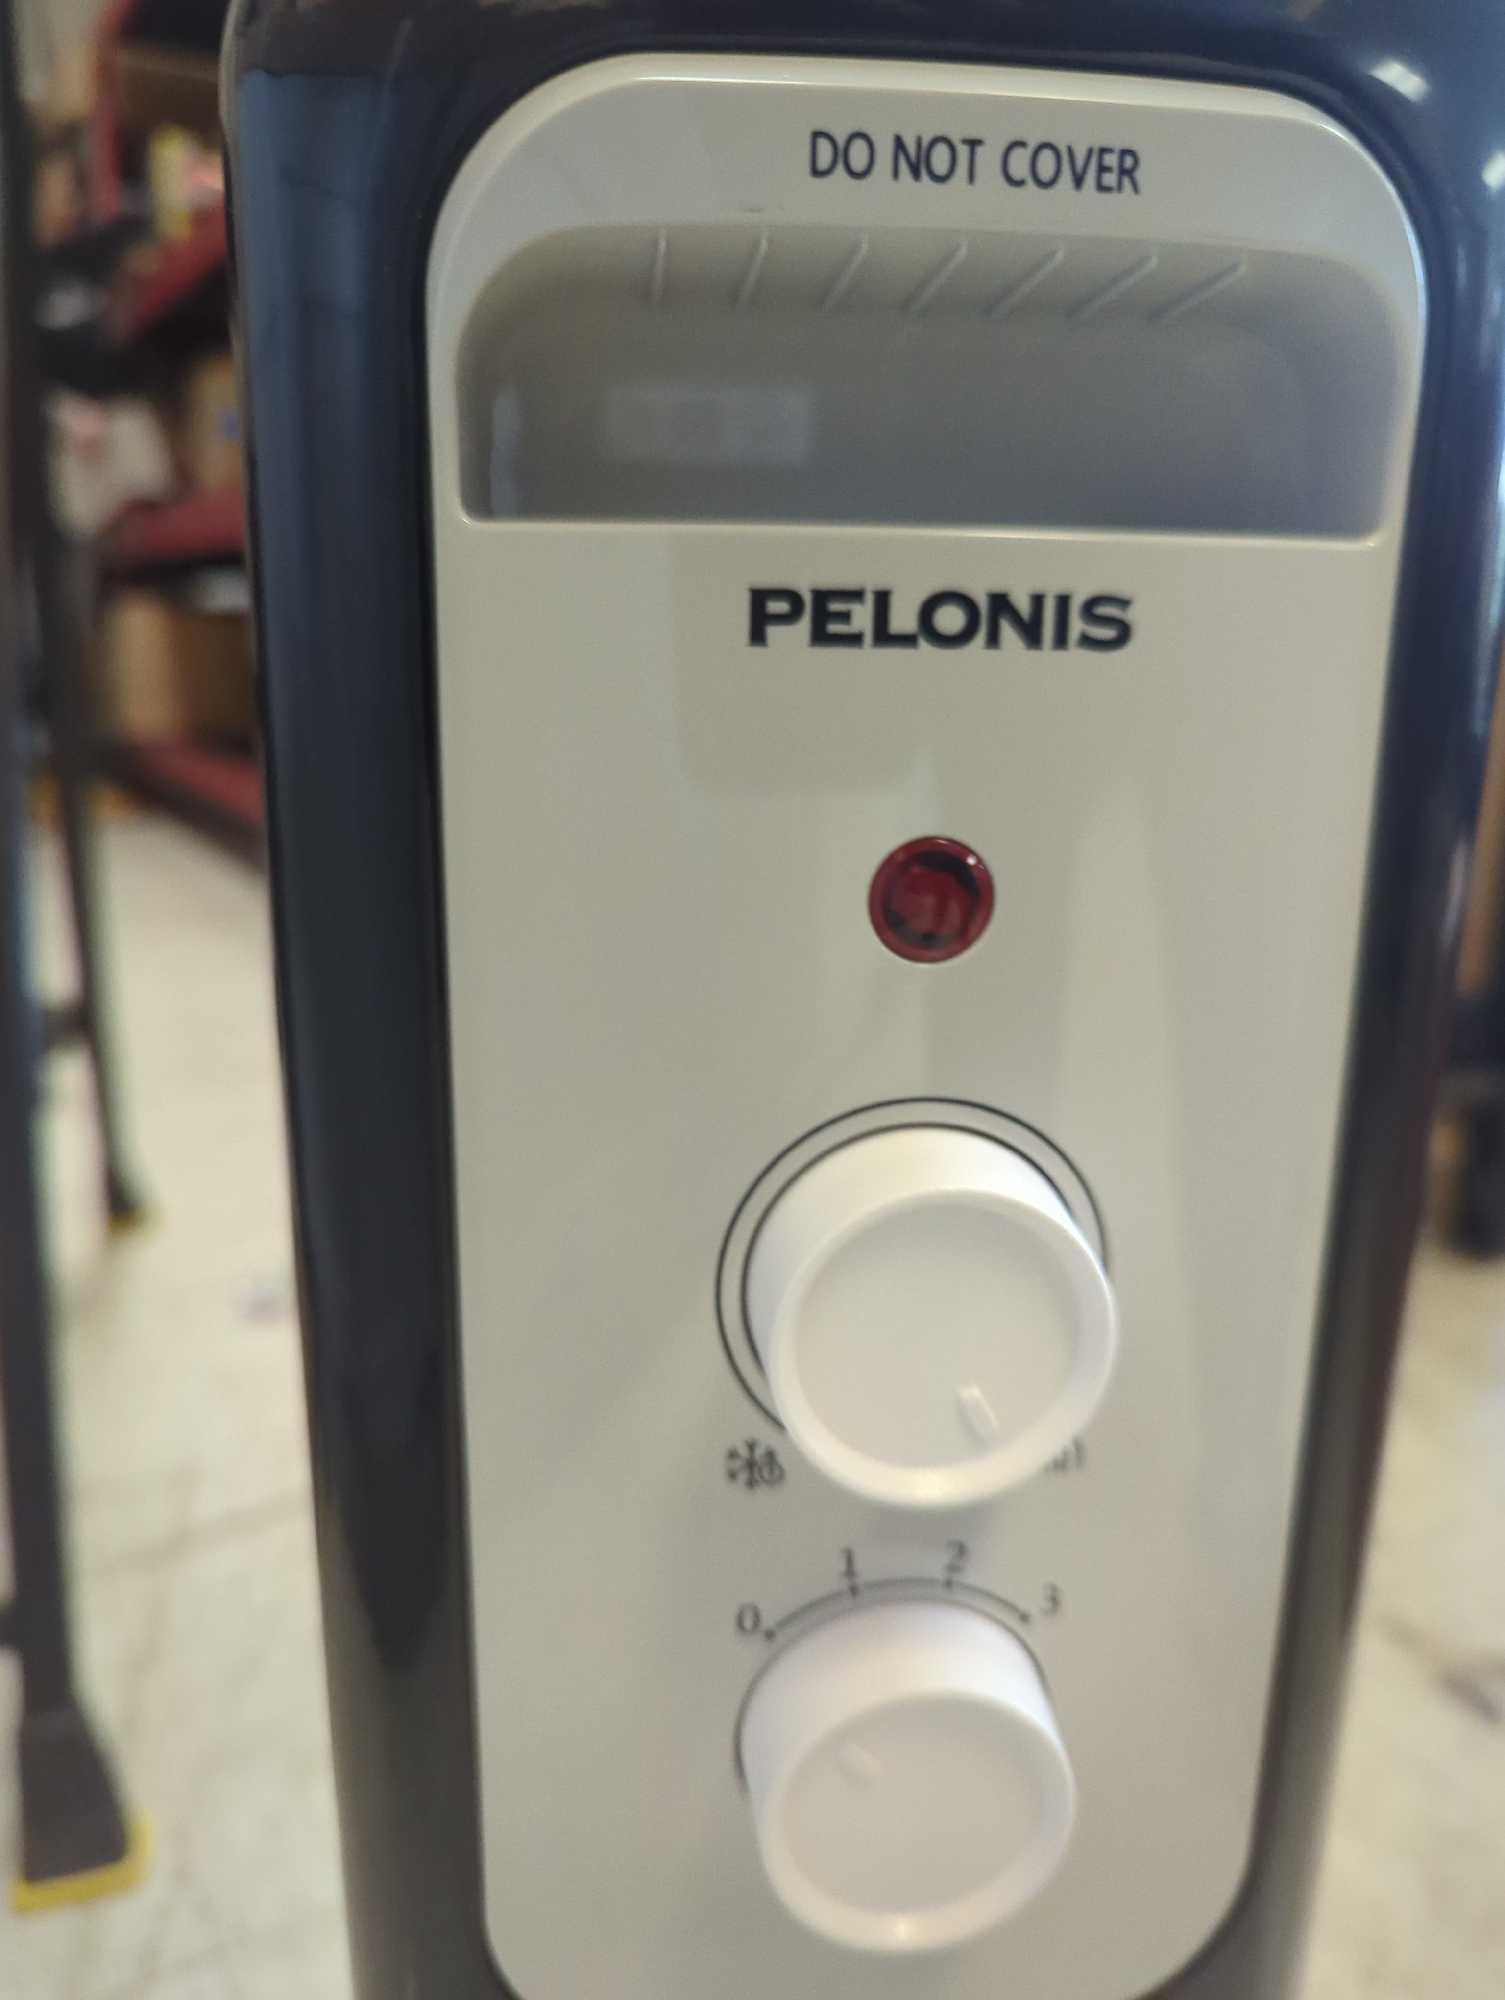 Pelonis 1,500-Watt Oil-Filled Radiant Electric Space Heater with Thermostat, Model HO-0279, Retail